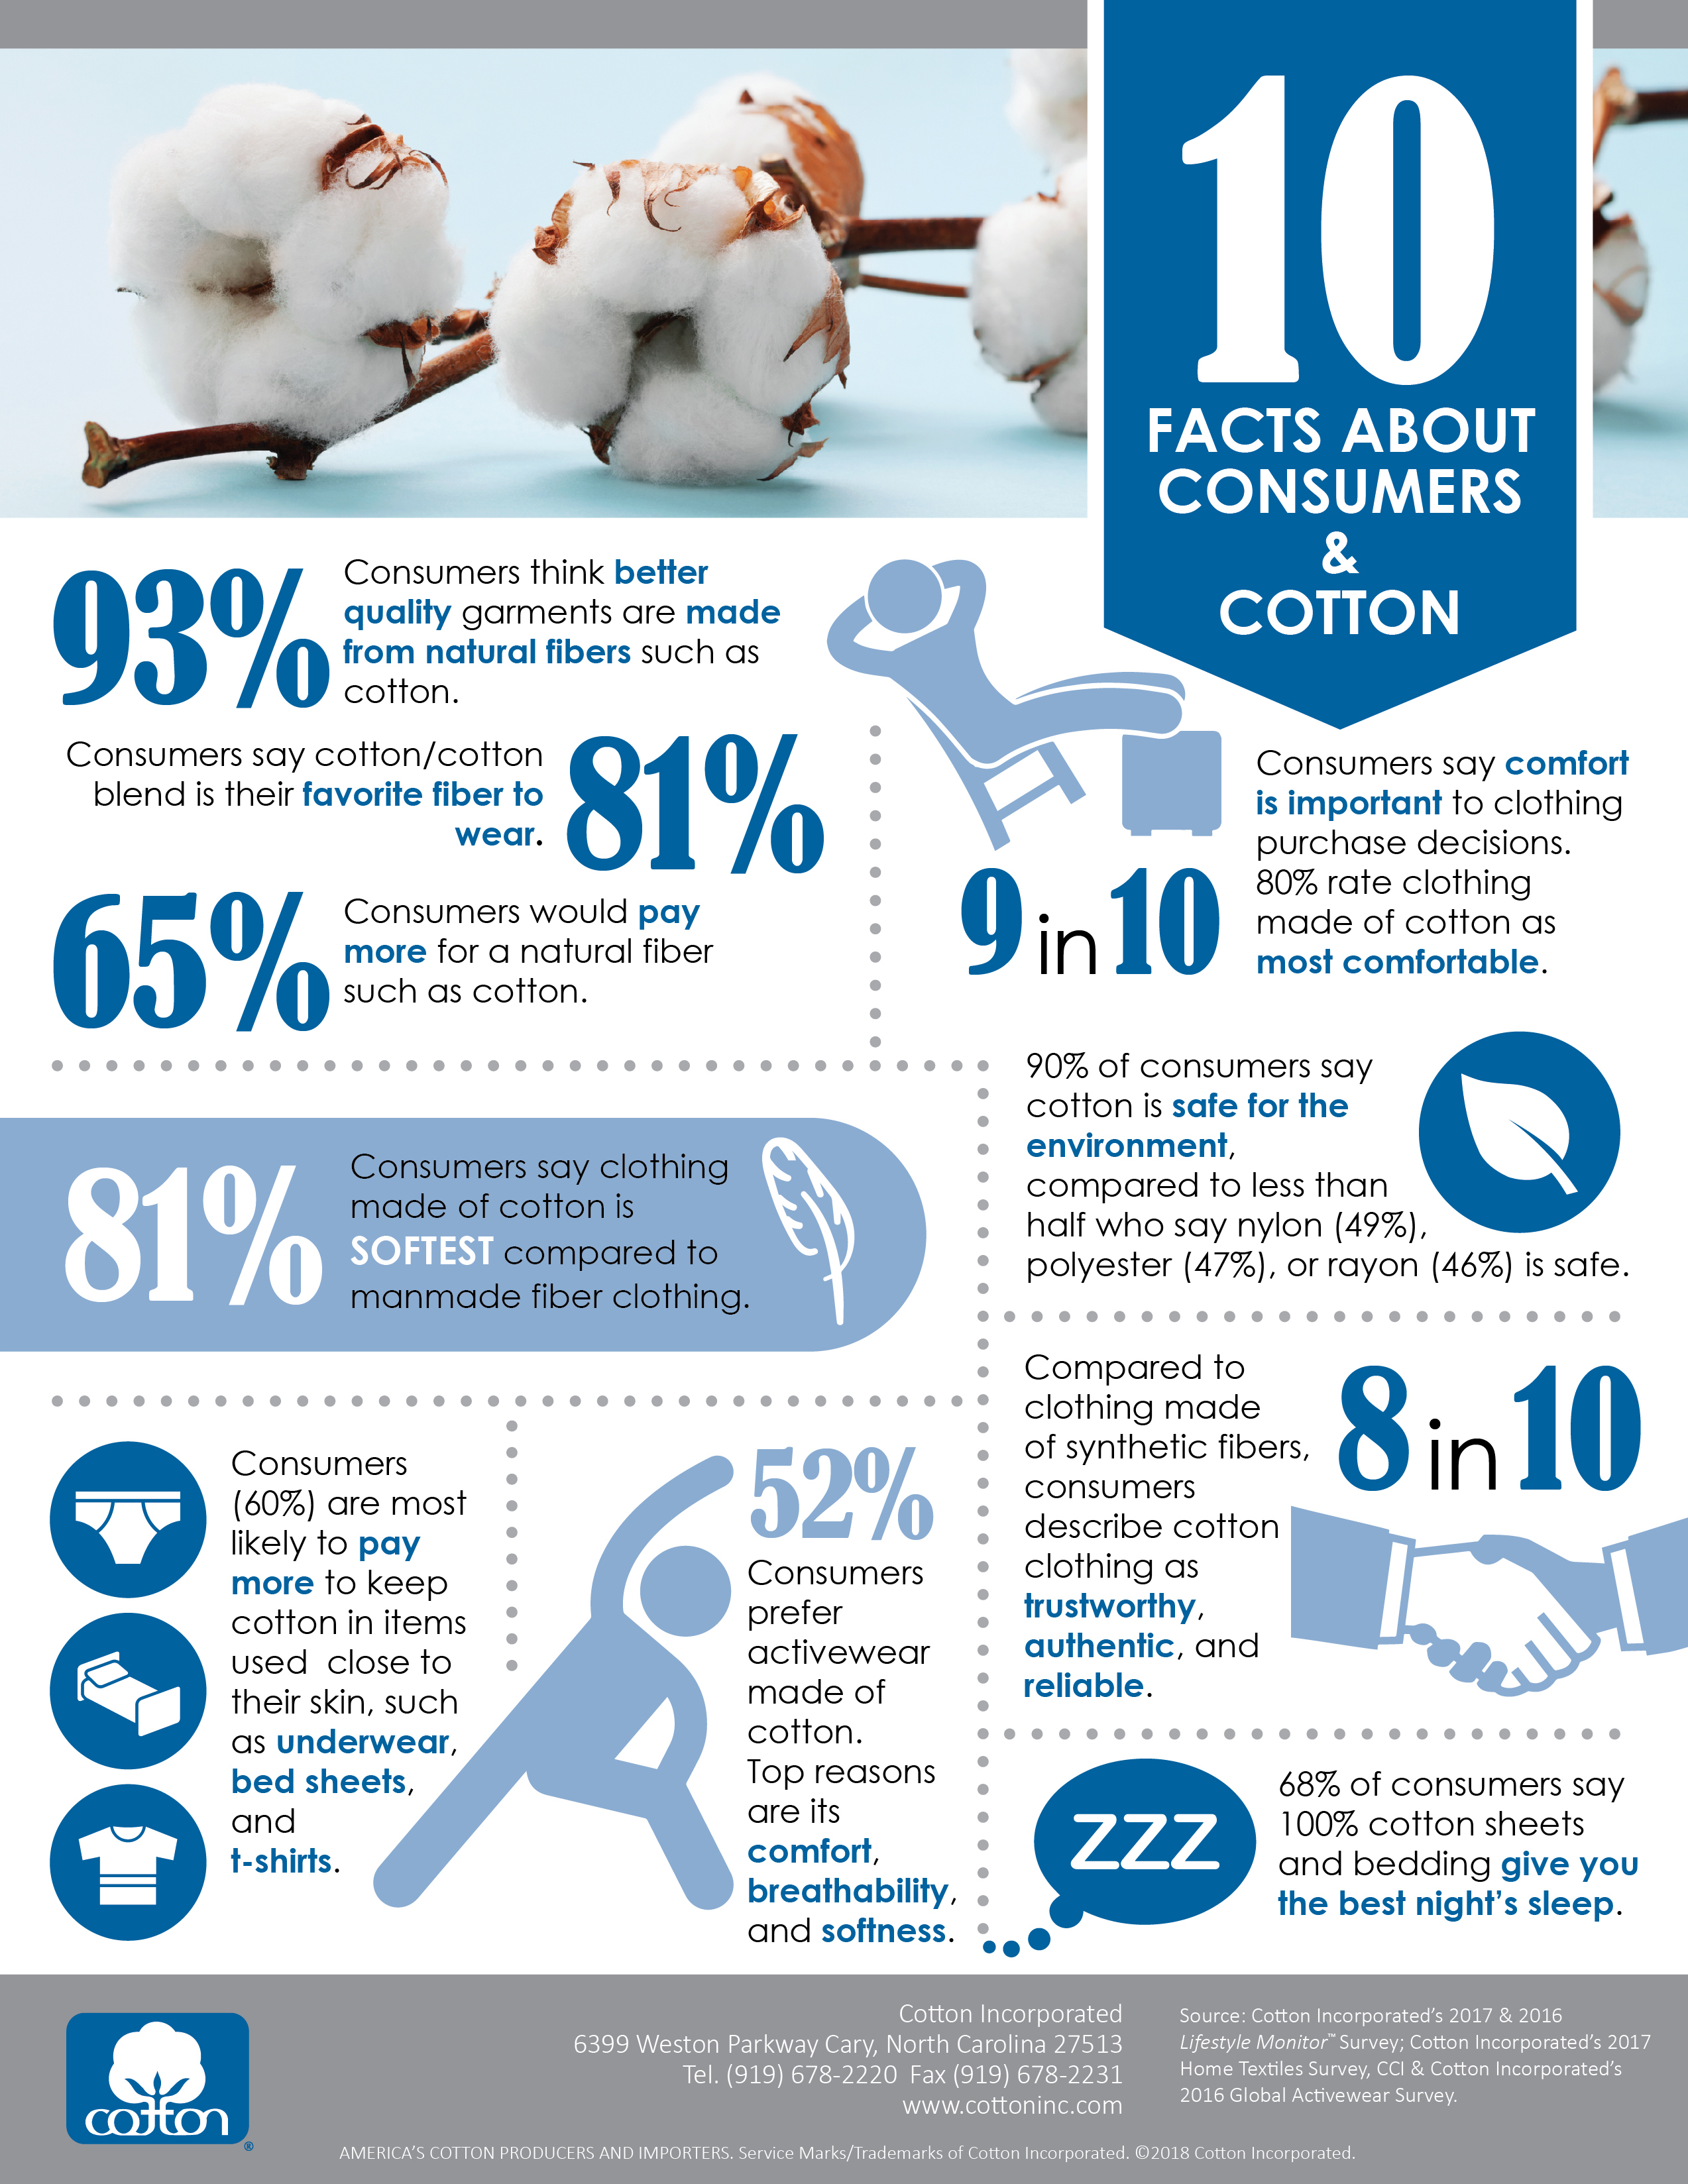 Ten Facts About Consumers and Cotton